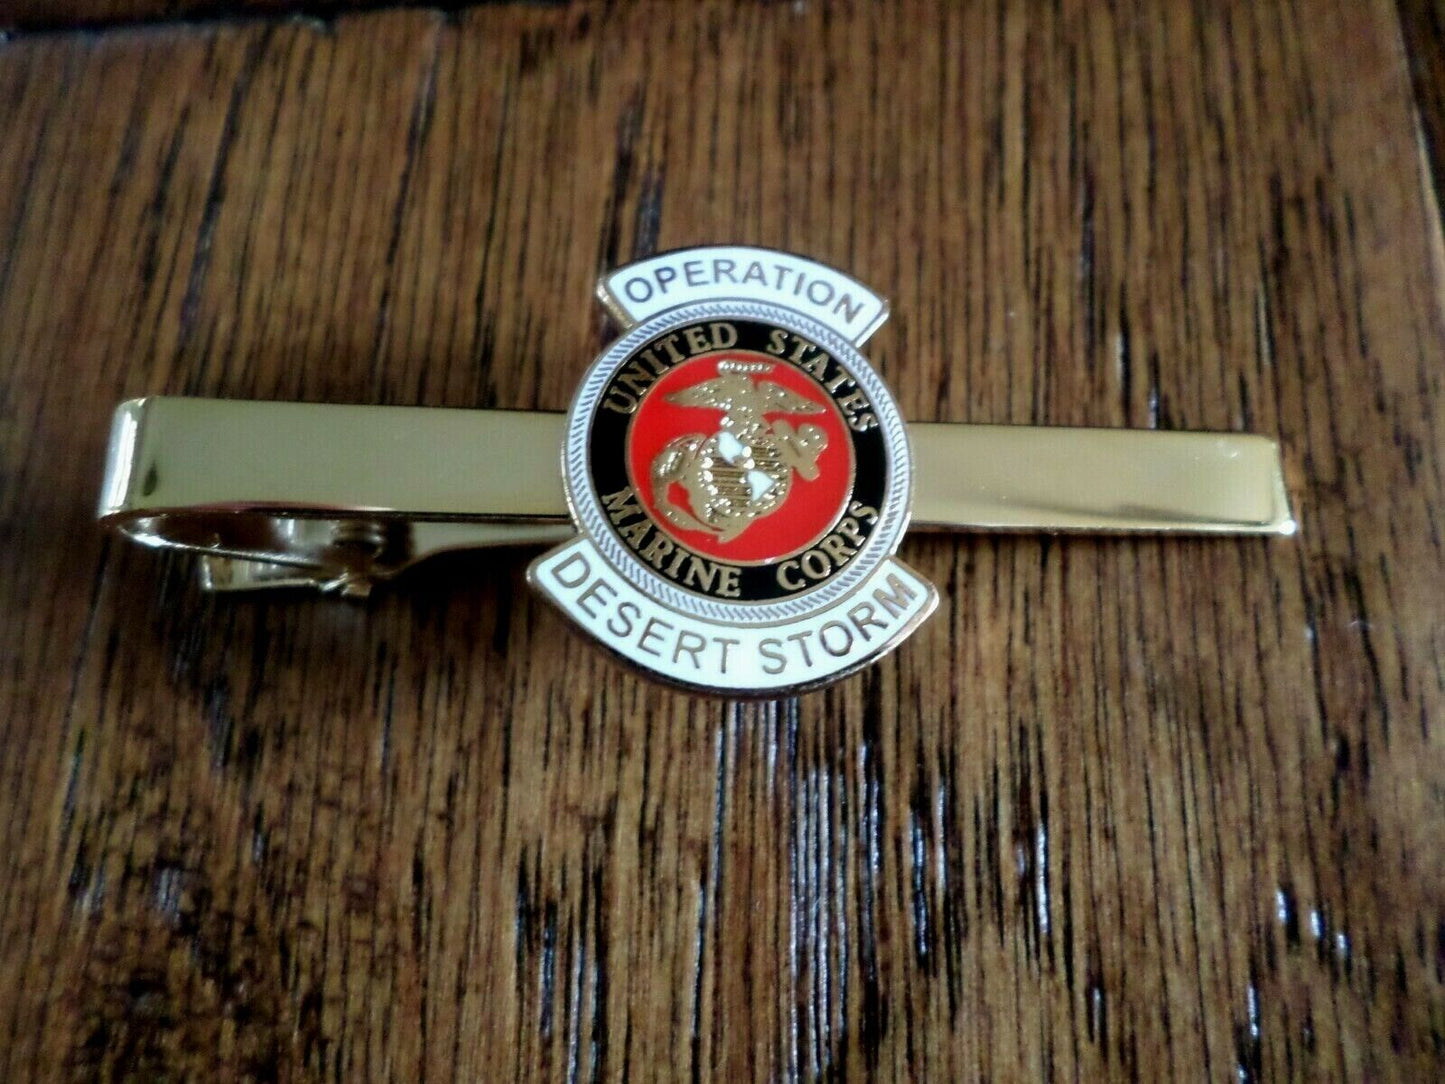 U.S MILITARY MARINE CORPS DESERT STORM TIE BAR OR TIE TAC CLIP ON TYPE USA MADE